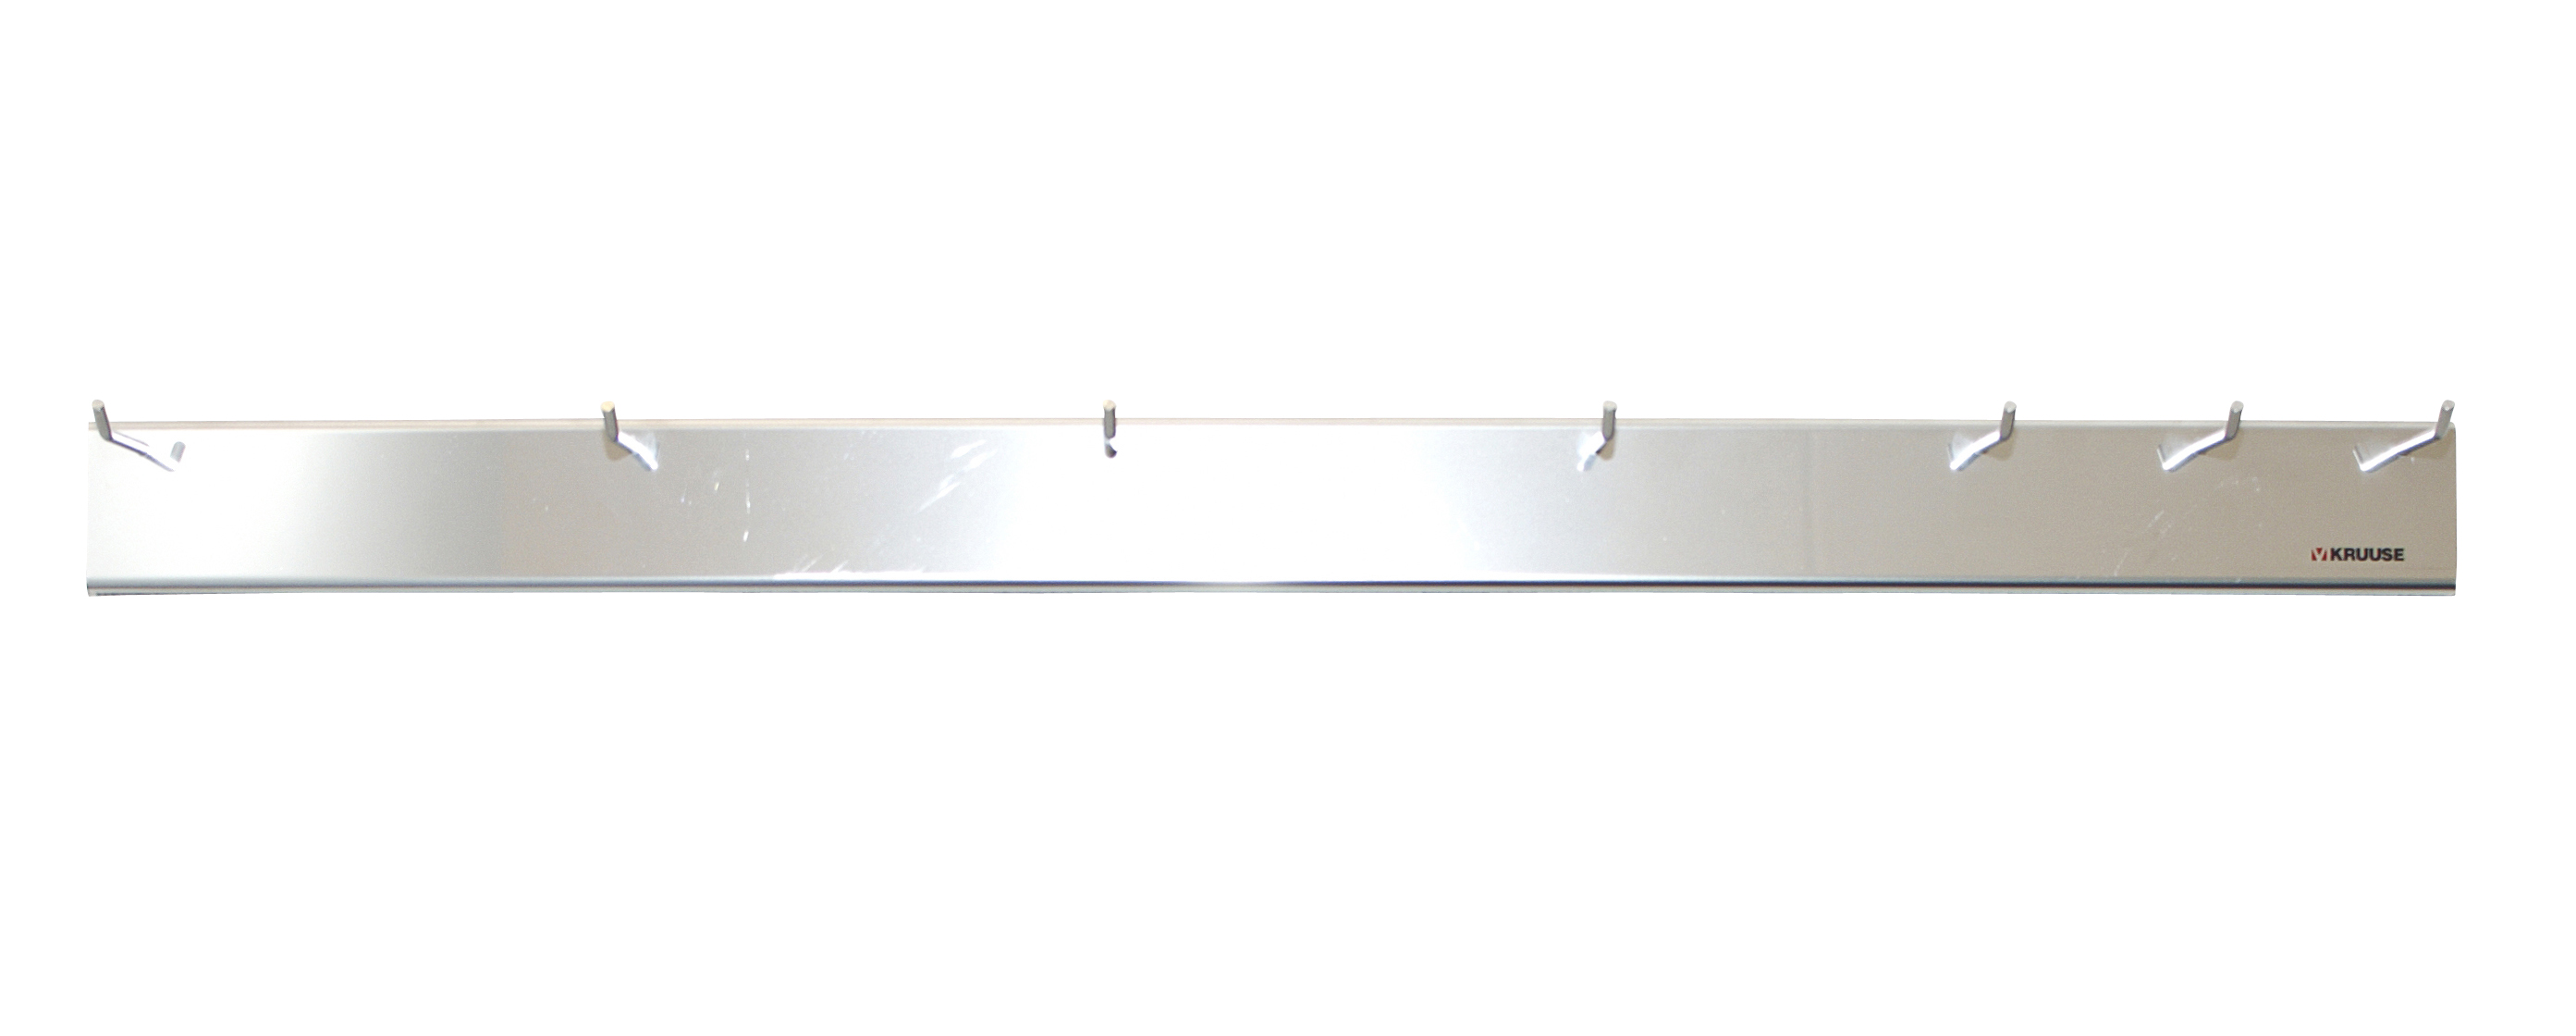 Stainless rack for collars